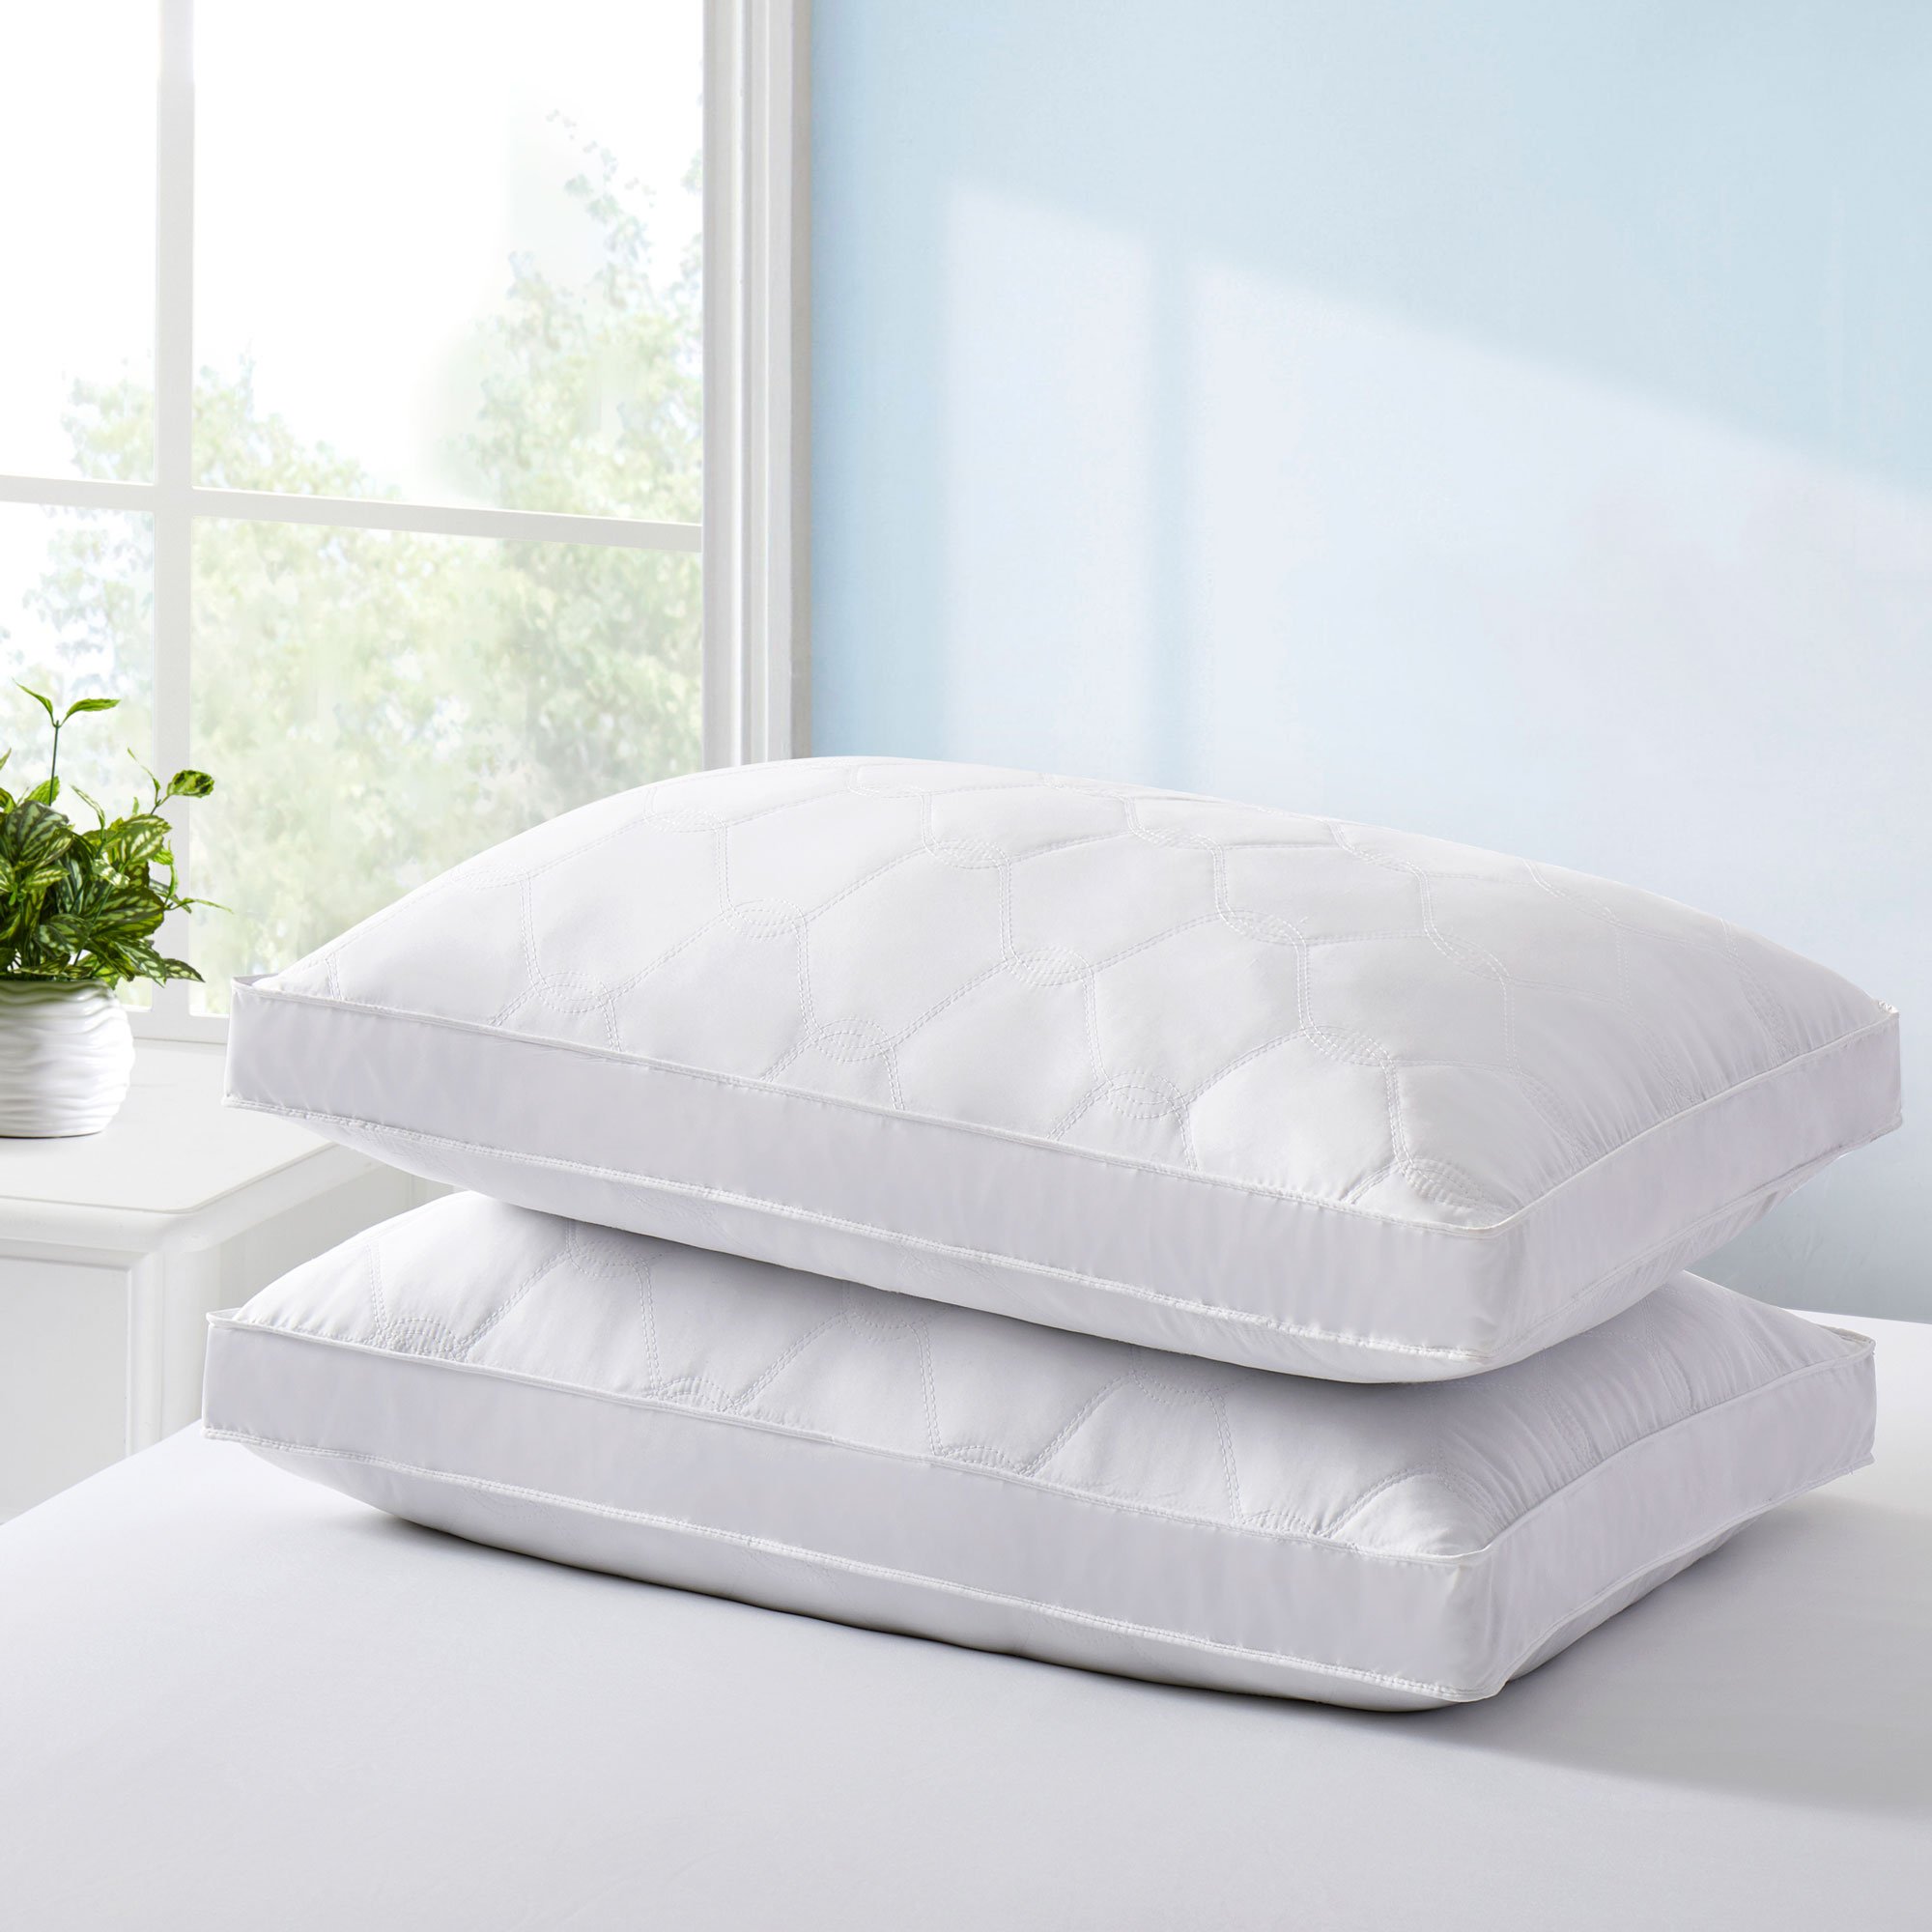 2 Pack Quilted Gusseted Feather And Down Pillow - KING, WHITE